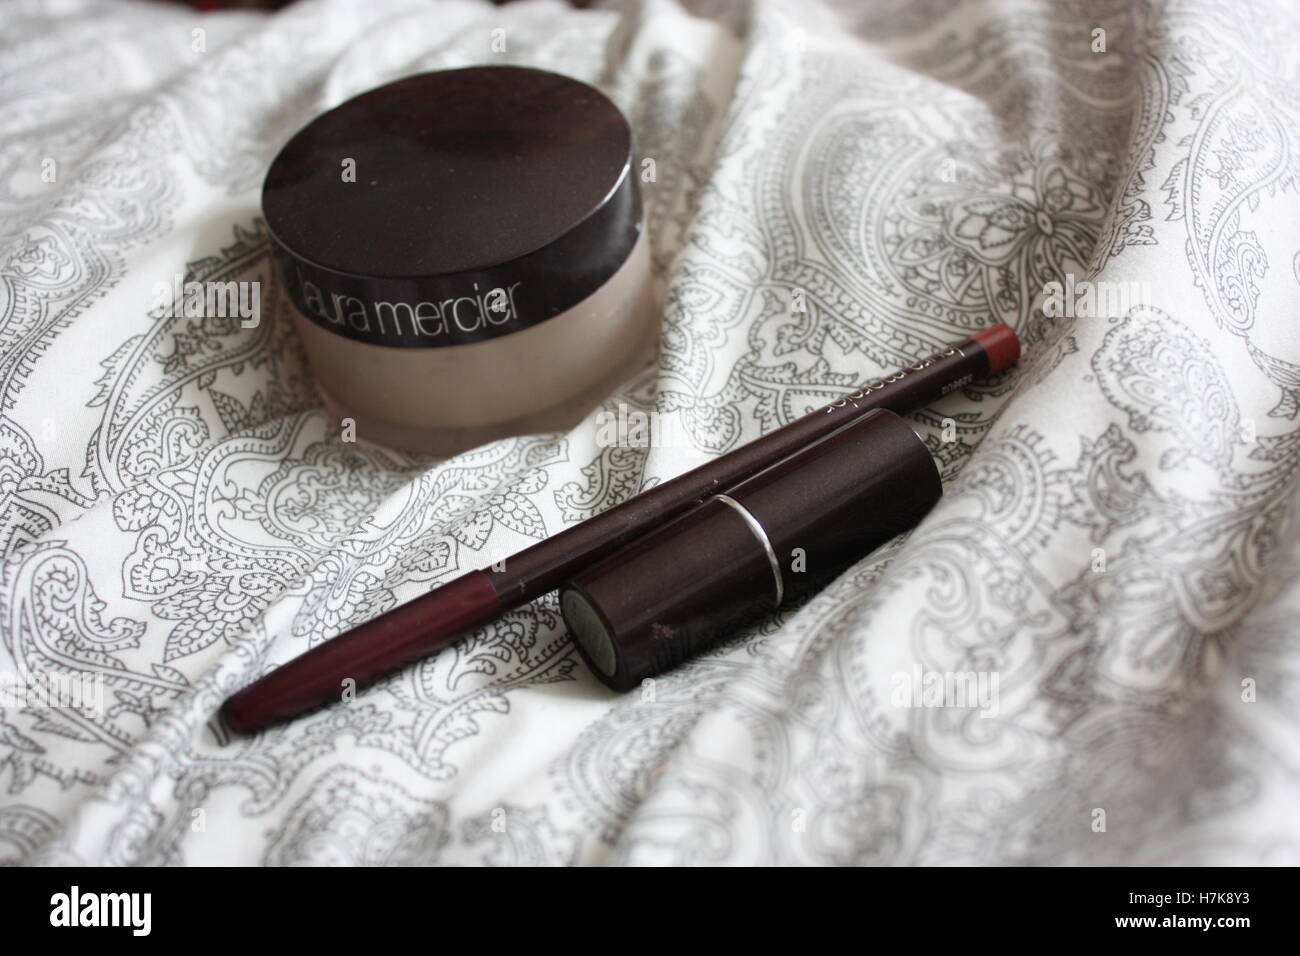 Makeup on the bed - foundation, eyeliner and a lipstick - Laura Mercier Stock Photo